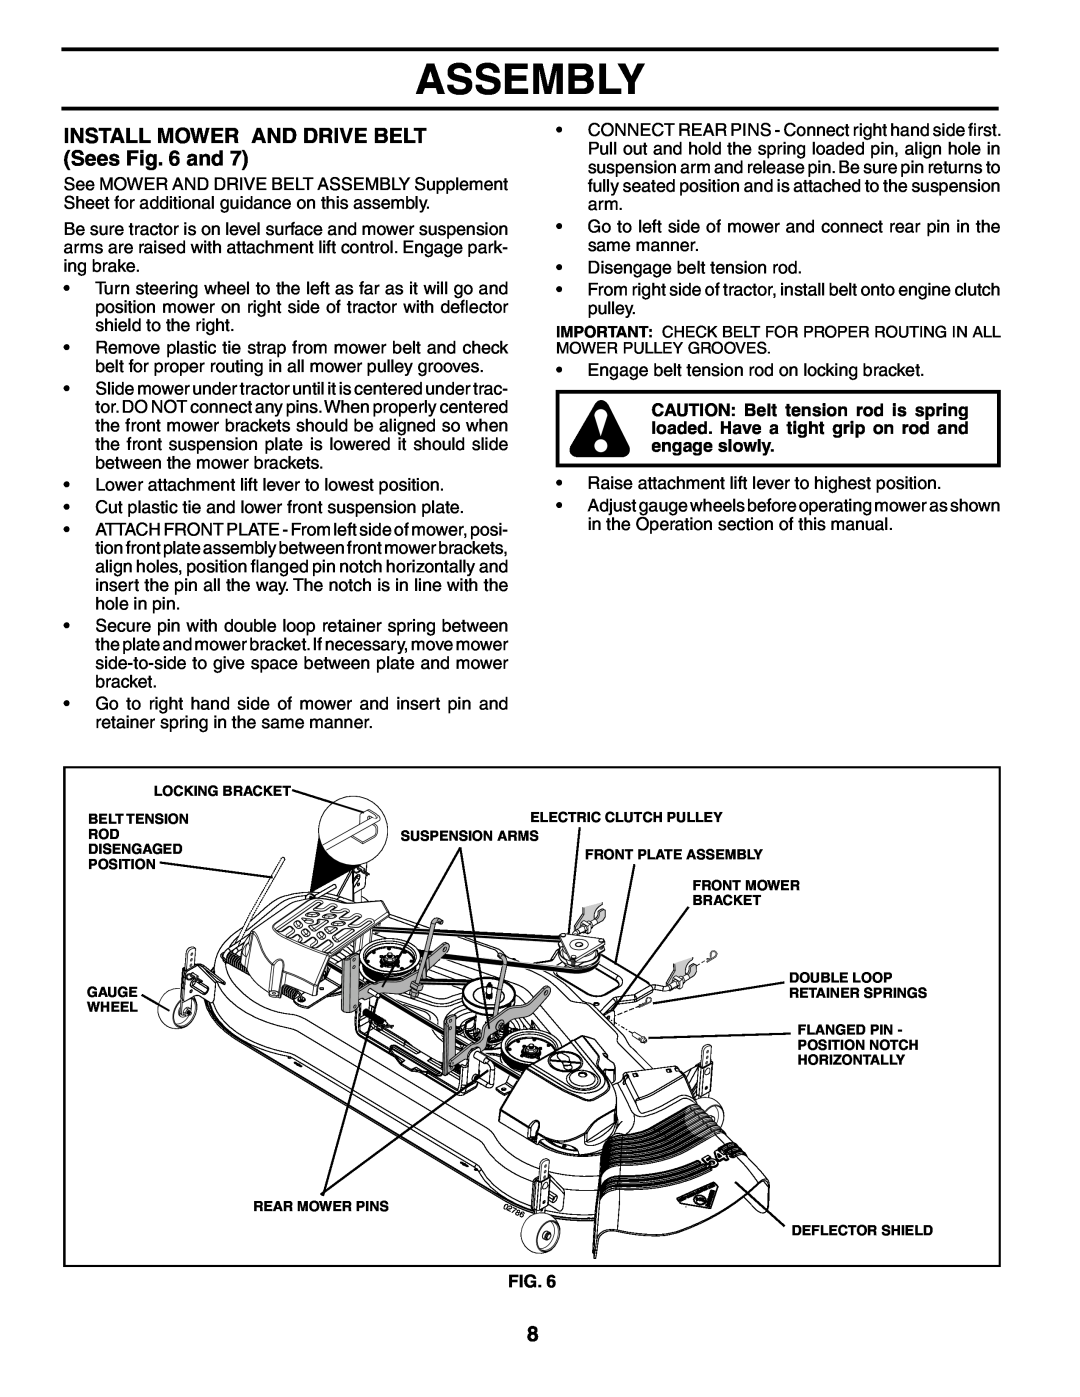 Husqvarna GT2254 owner manual INSTALL MOWER AND DRIVE BELT Sees and, Assembly 